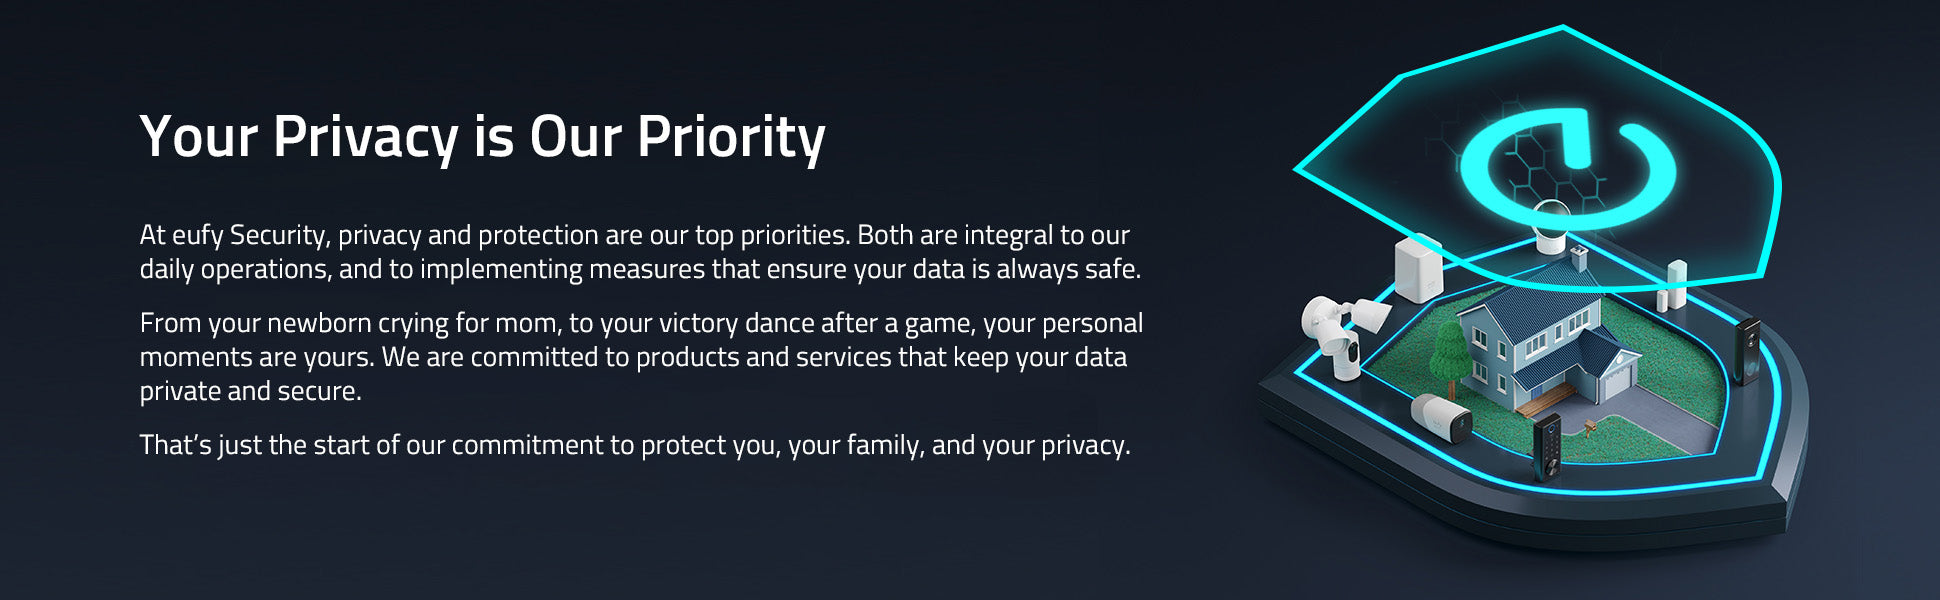 Your_Privacy_is_Our_Priority_1